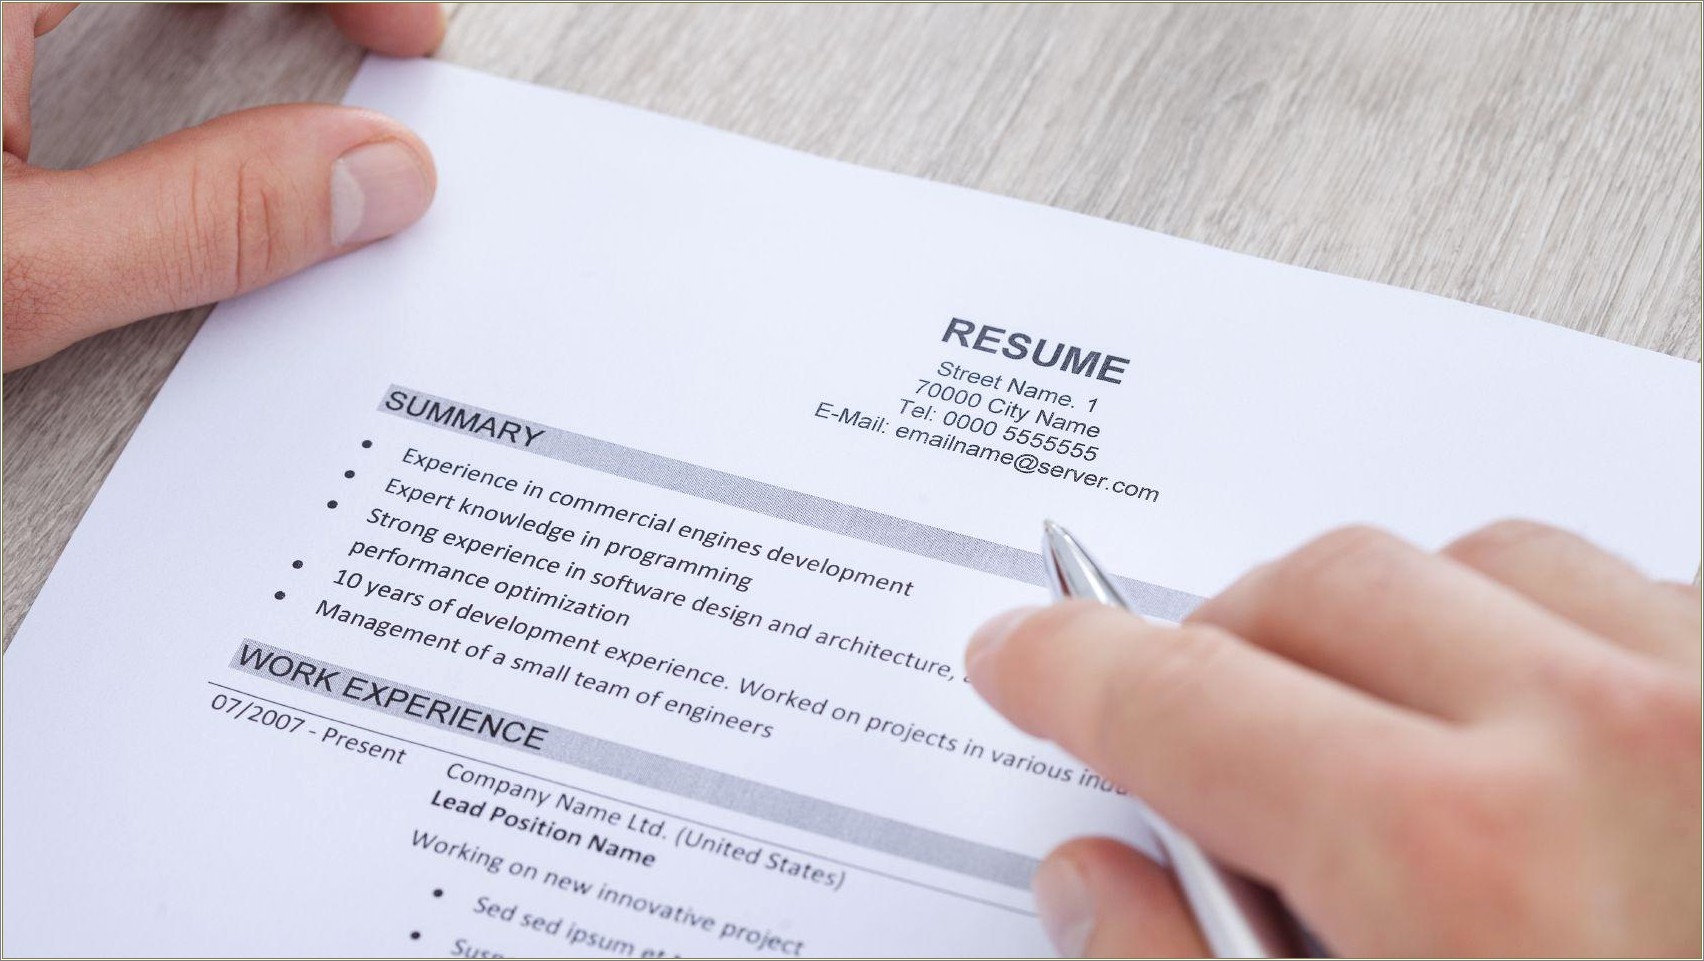 Do You Put Your Certifications On Your Resume